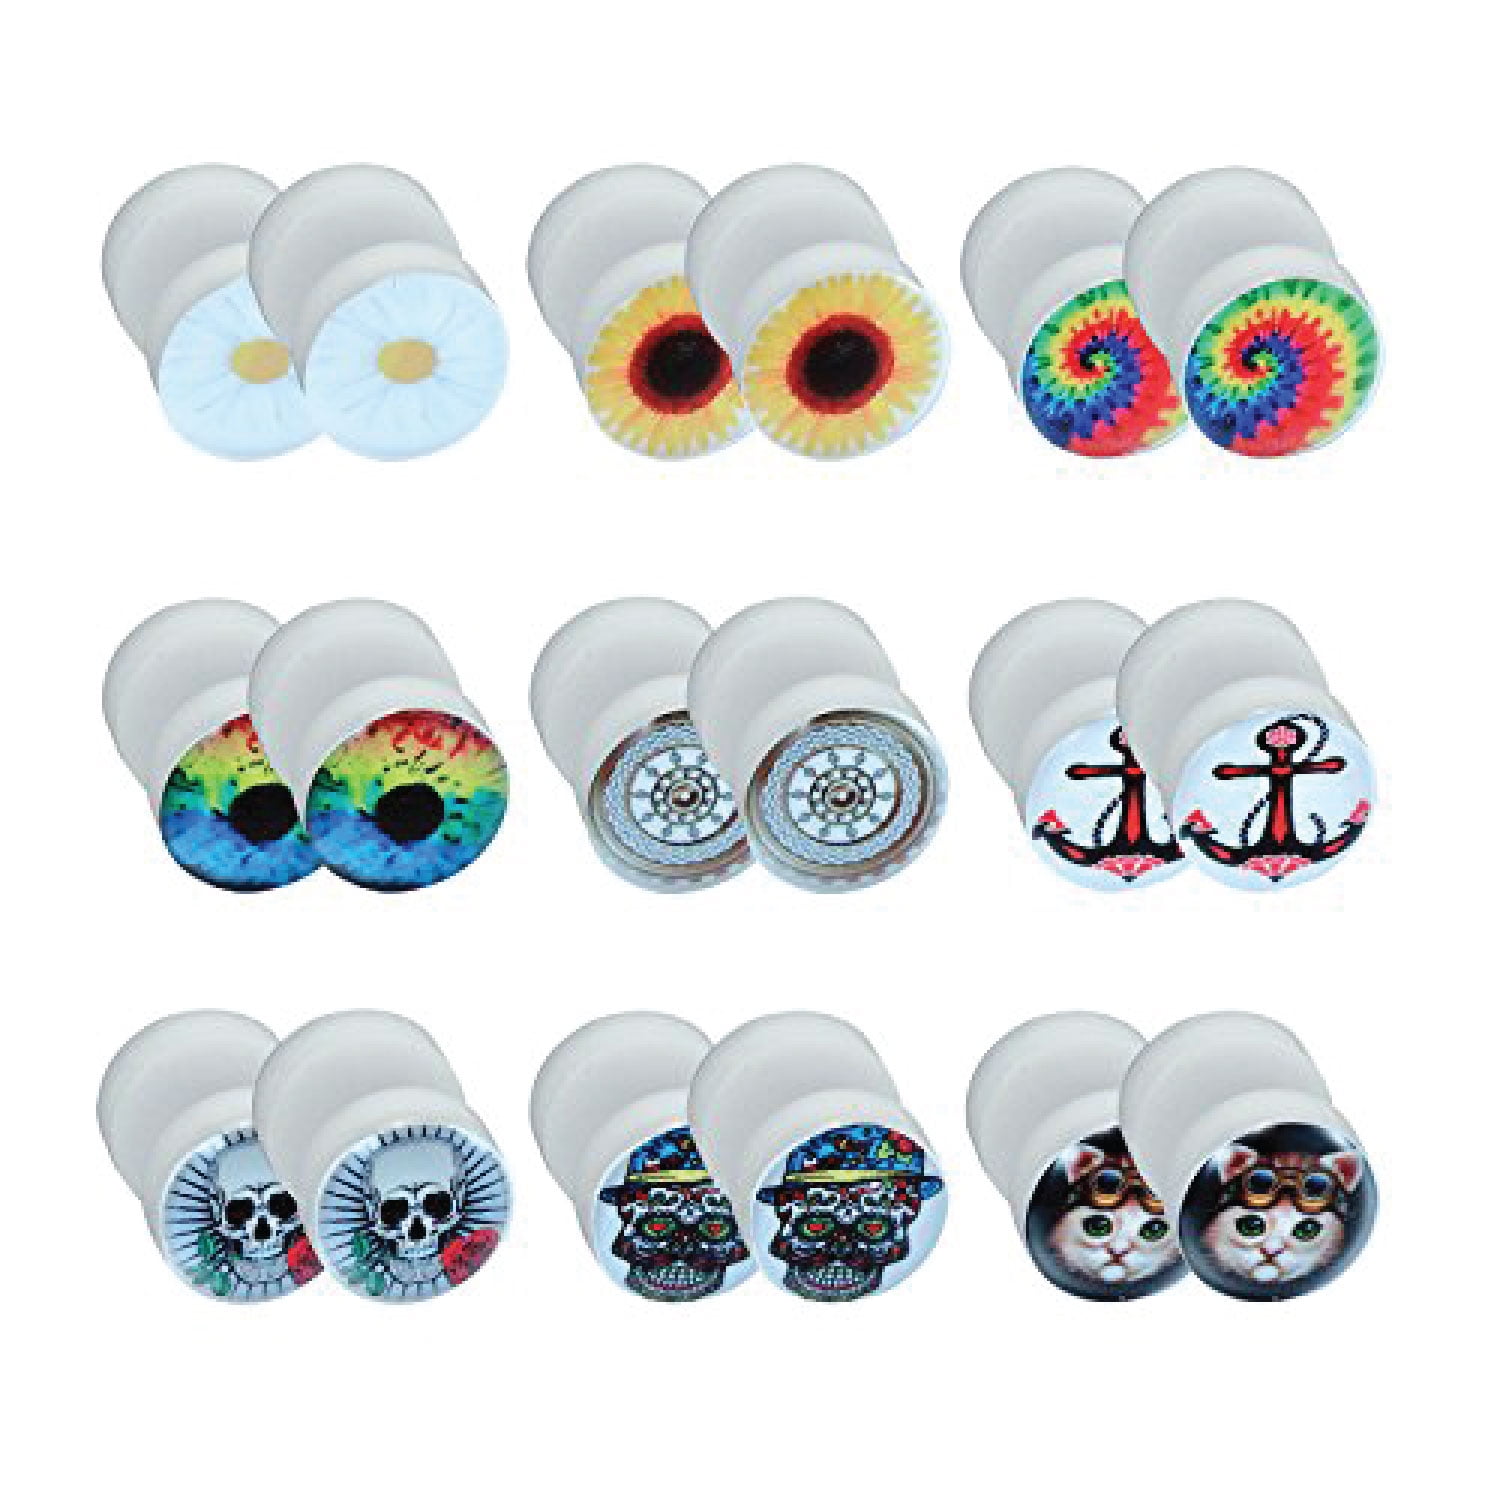 Sold as a Pair Body Accentz™ Earrings Rings Fake Rainbow Cheater Plug 16 Gauge